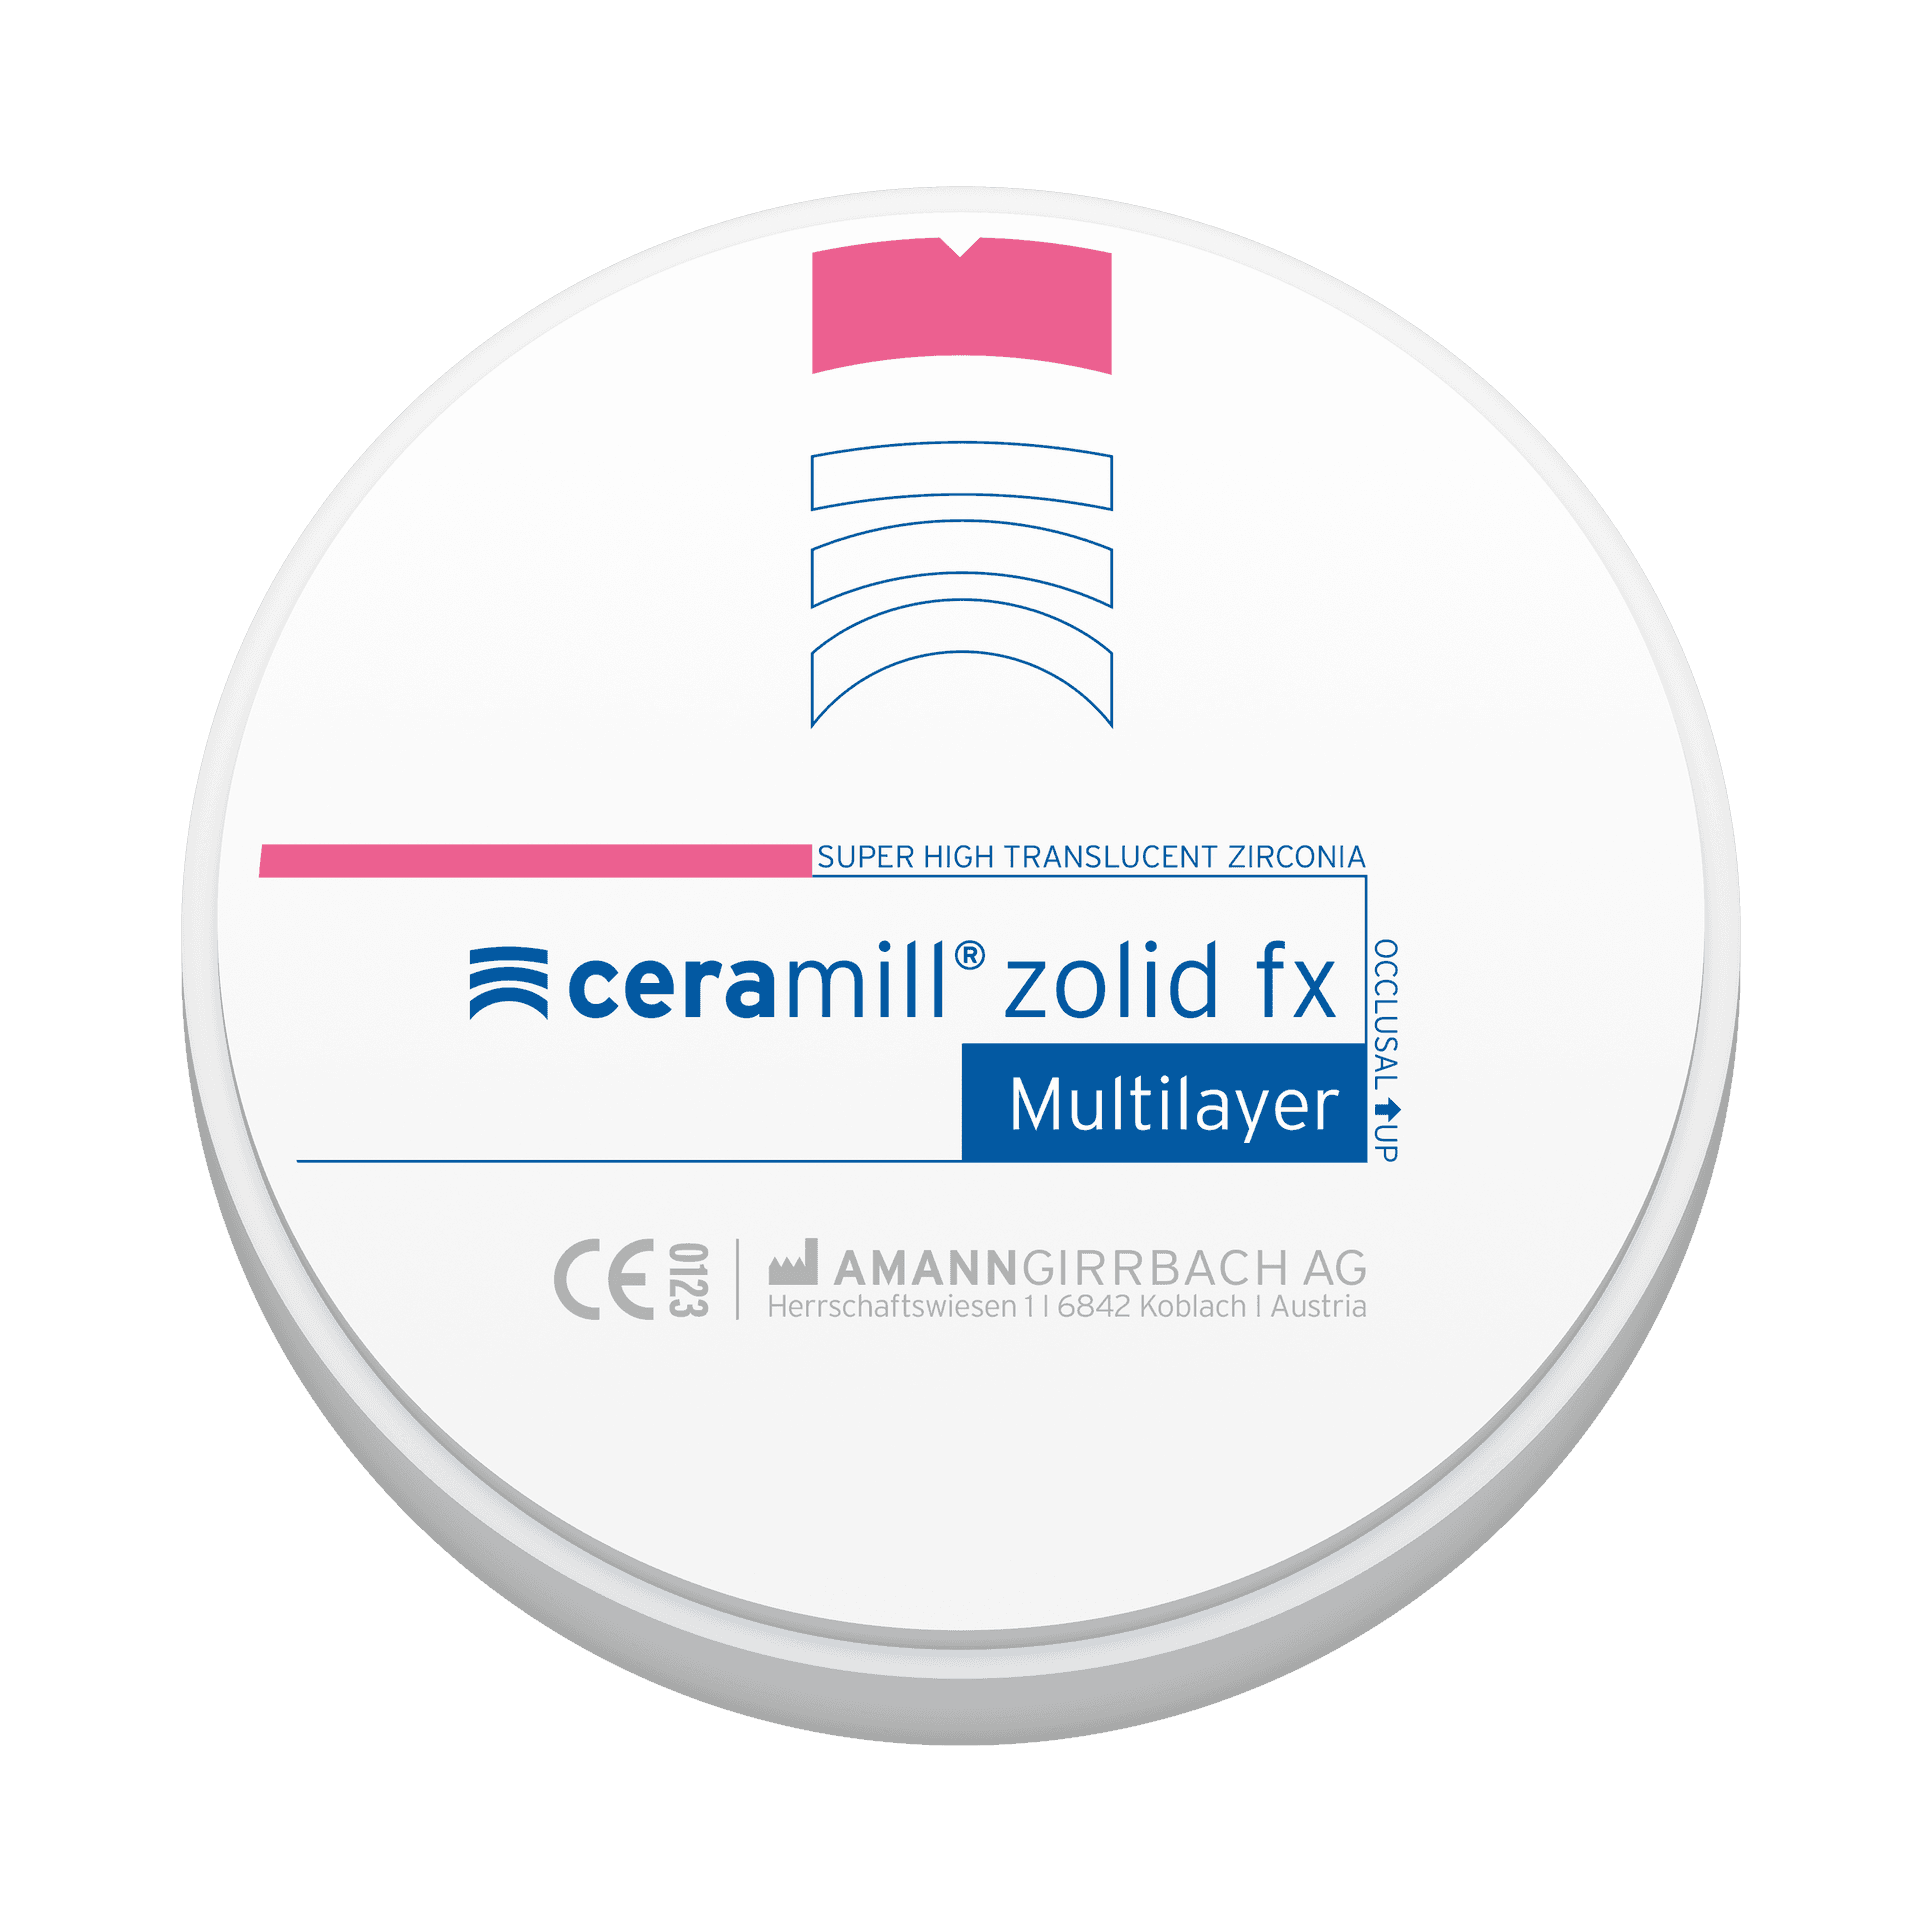 Ceramill Zolid FX Multilayer Group Front